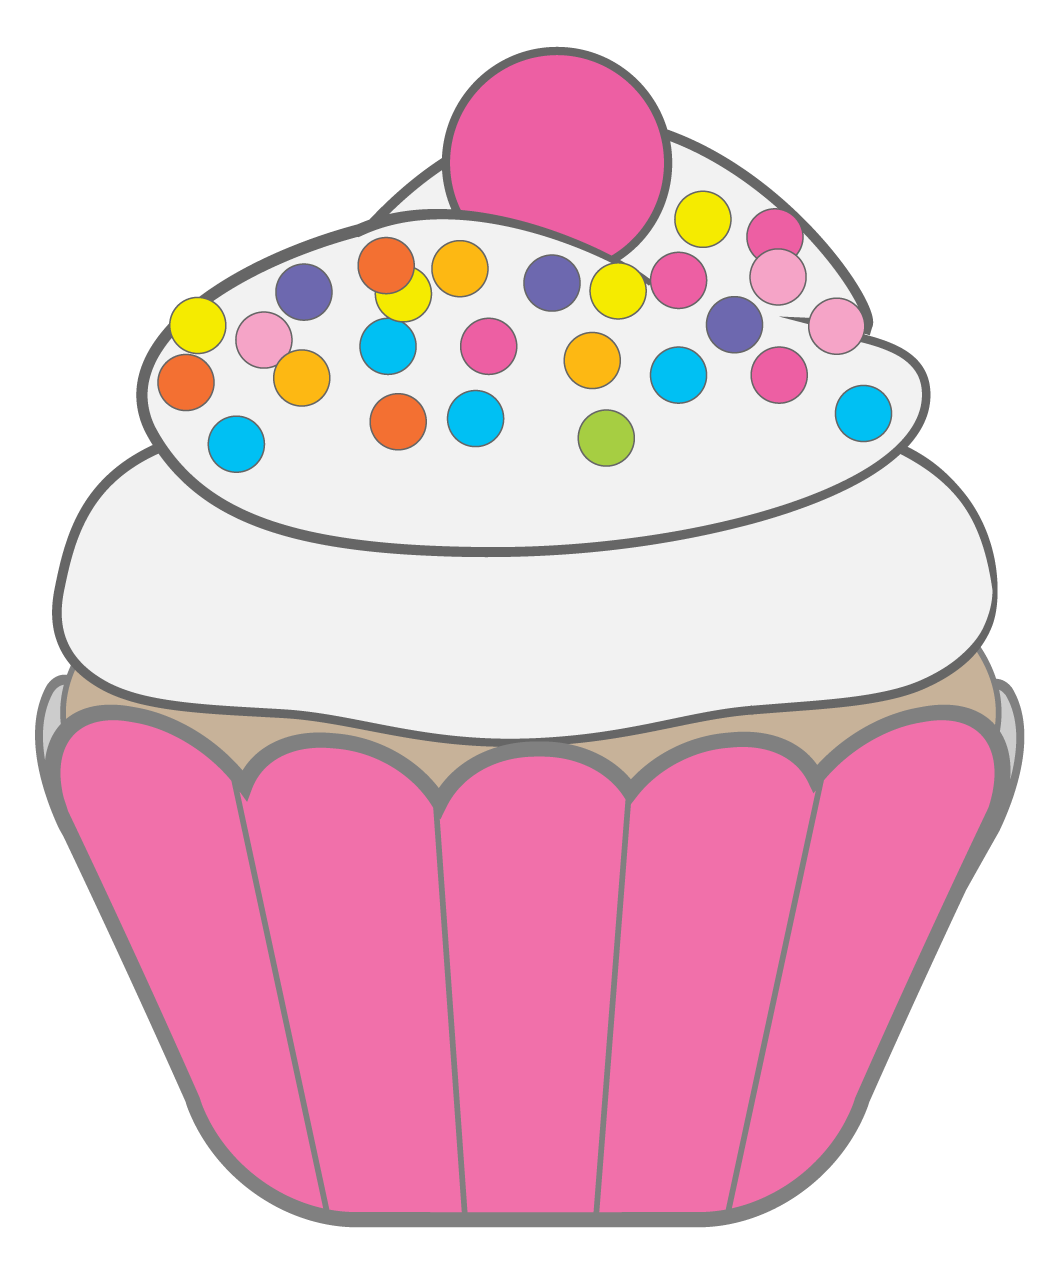 Muffins clipart. Cupcakes by carol smith